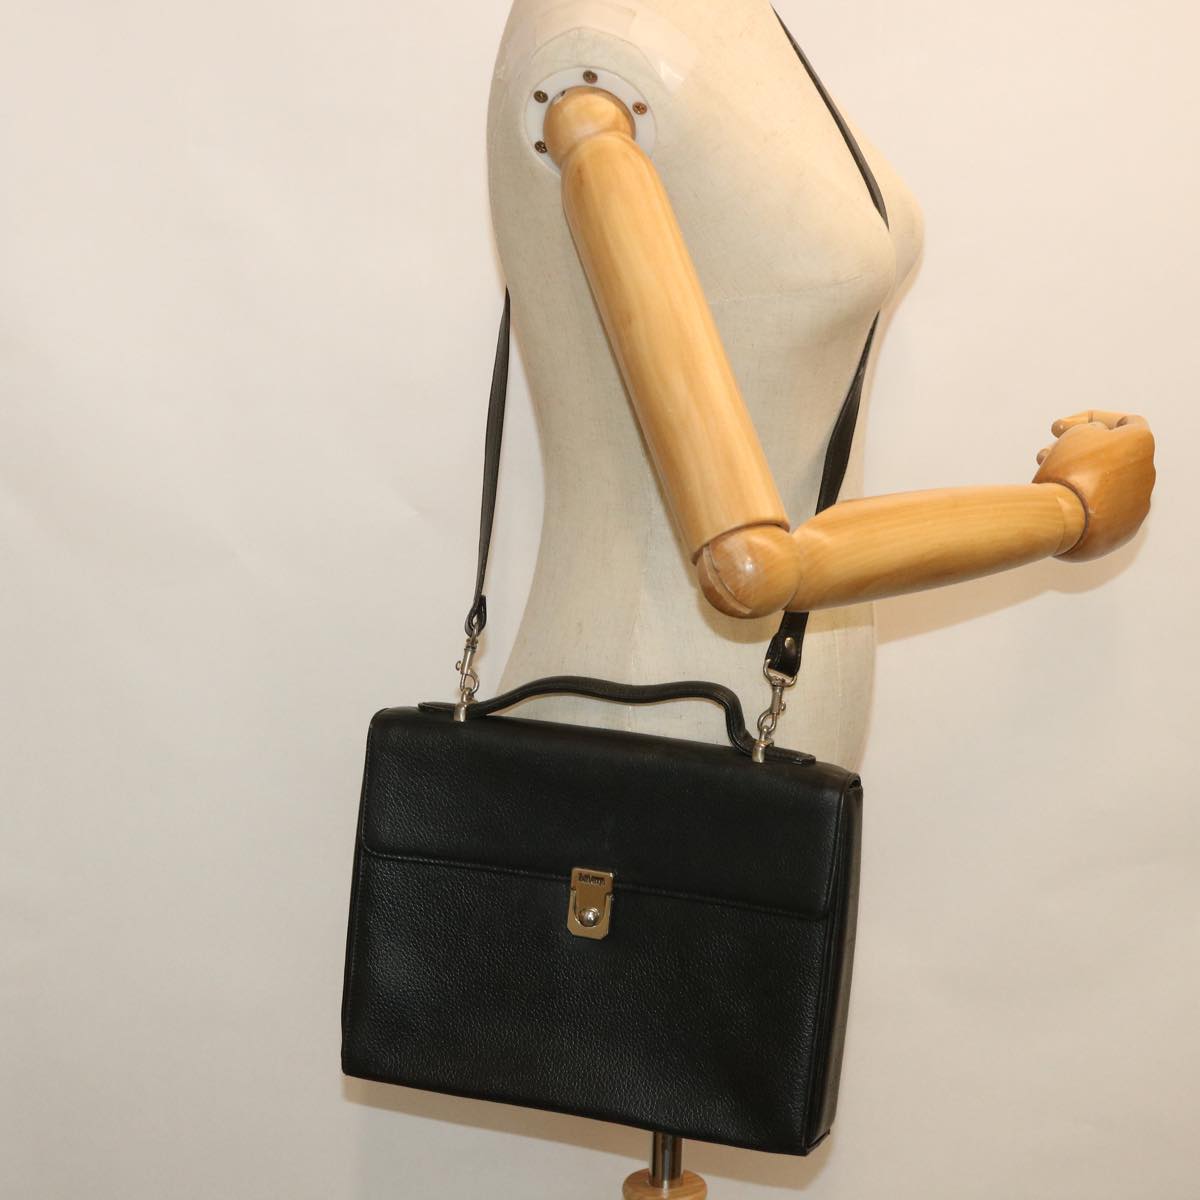 Burberrys Hand Bag Leather 2way Black Auth bs8729